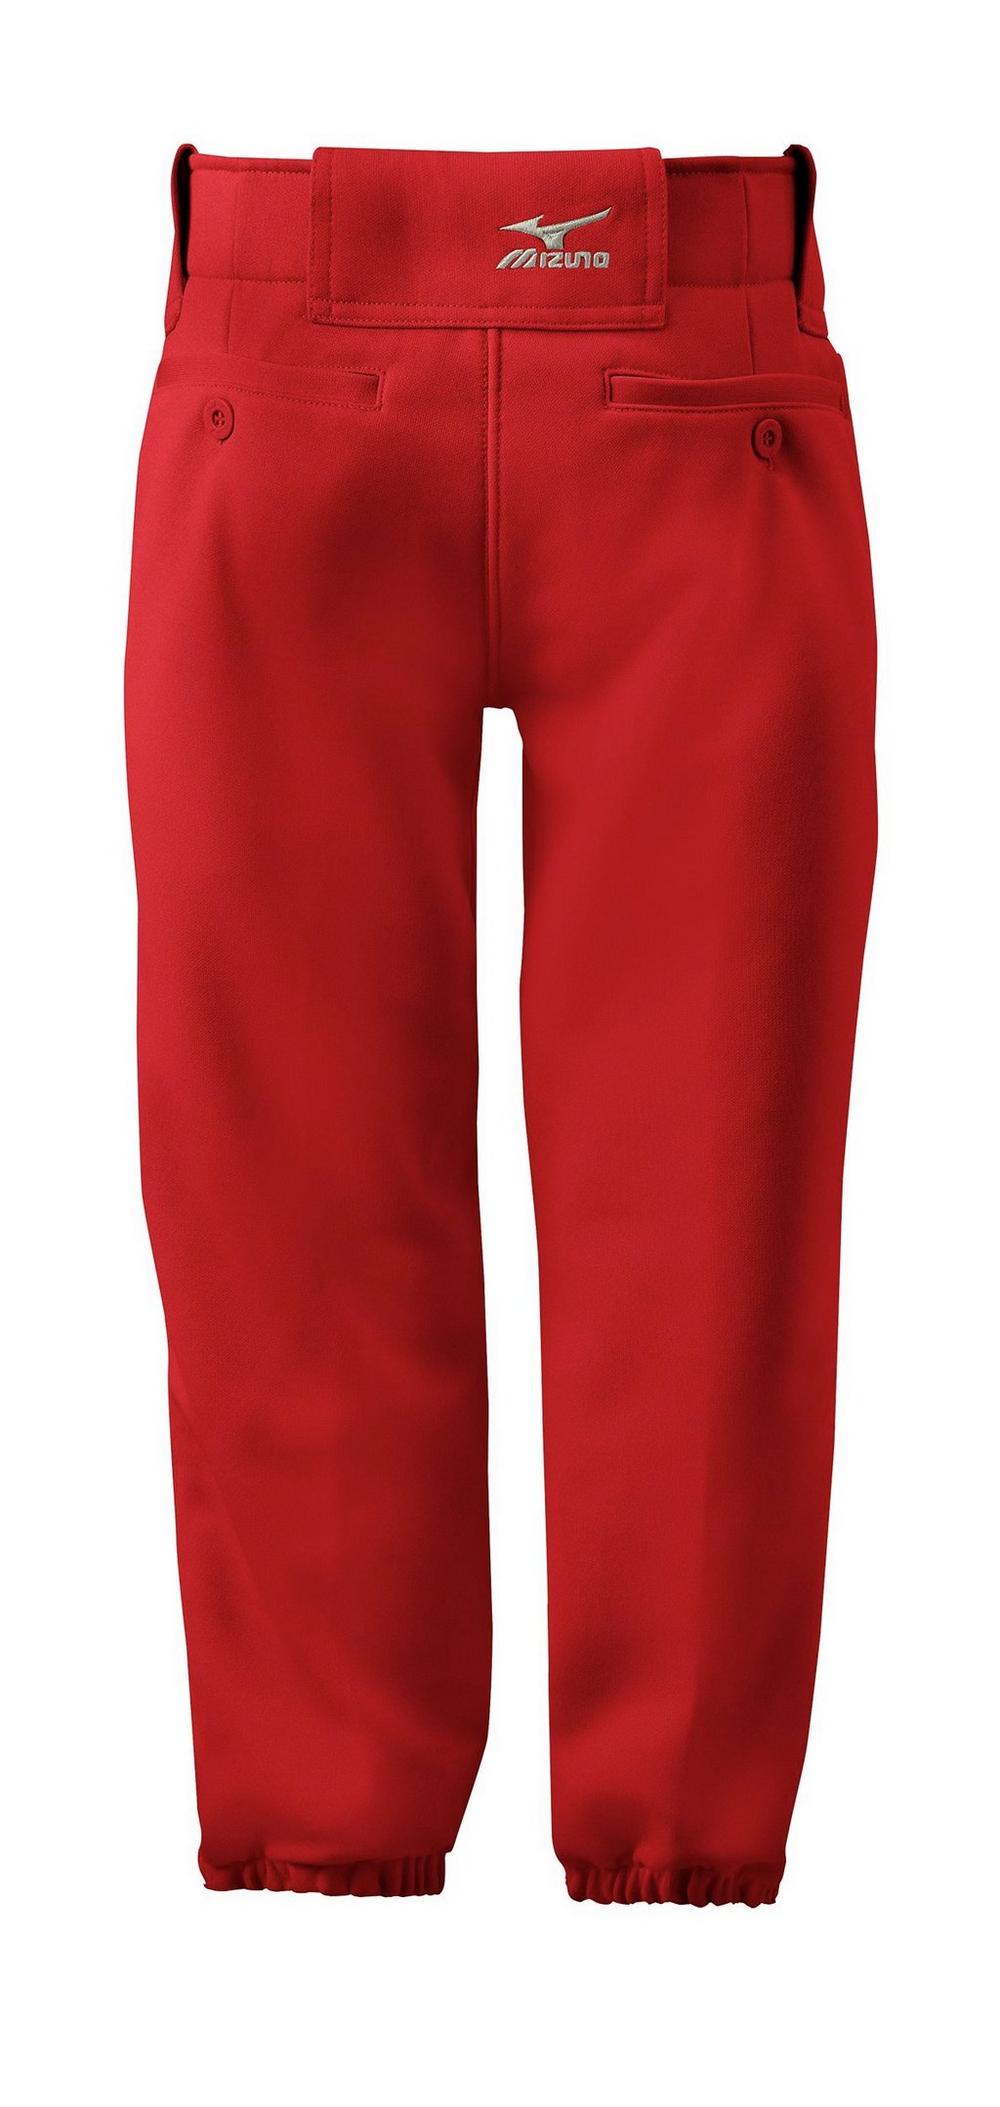 Under Armour Women's Utility Fastpitch Softball Pants Red Xl XL/Red 